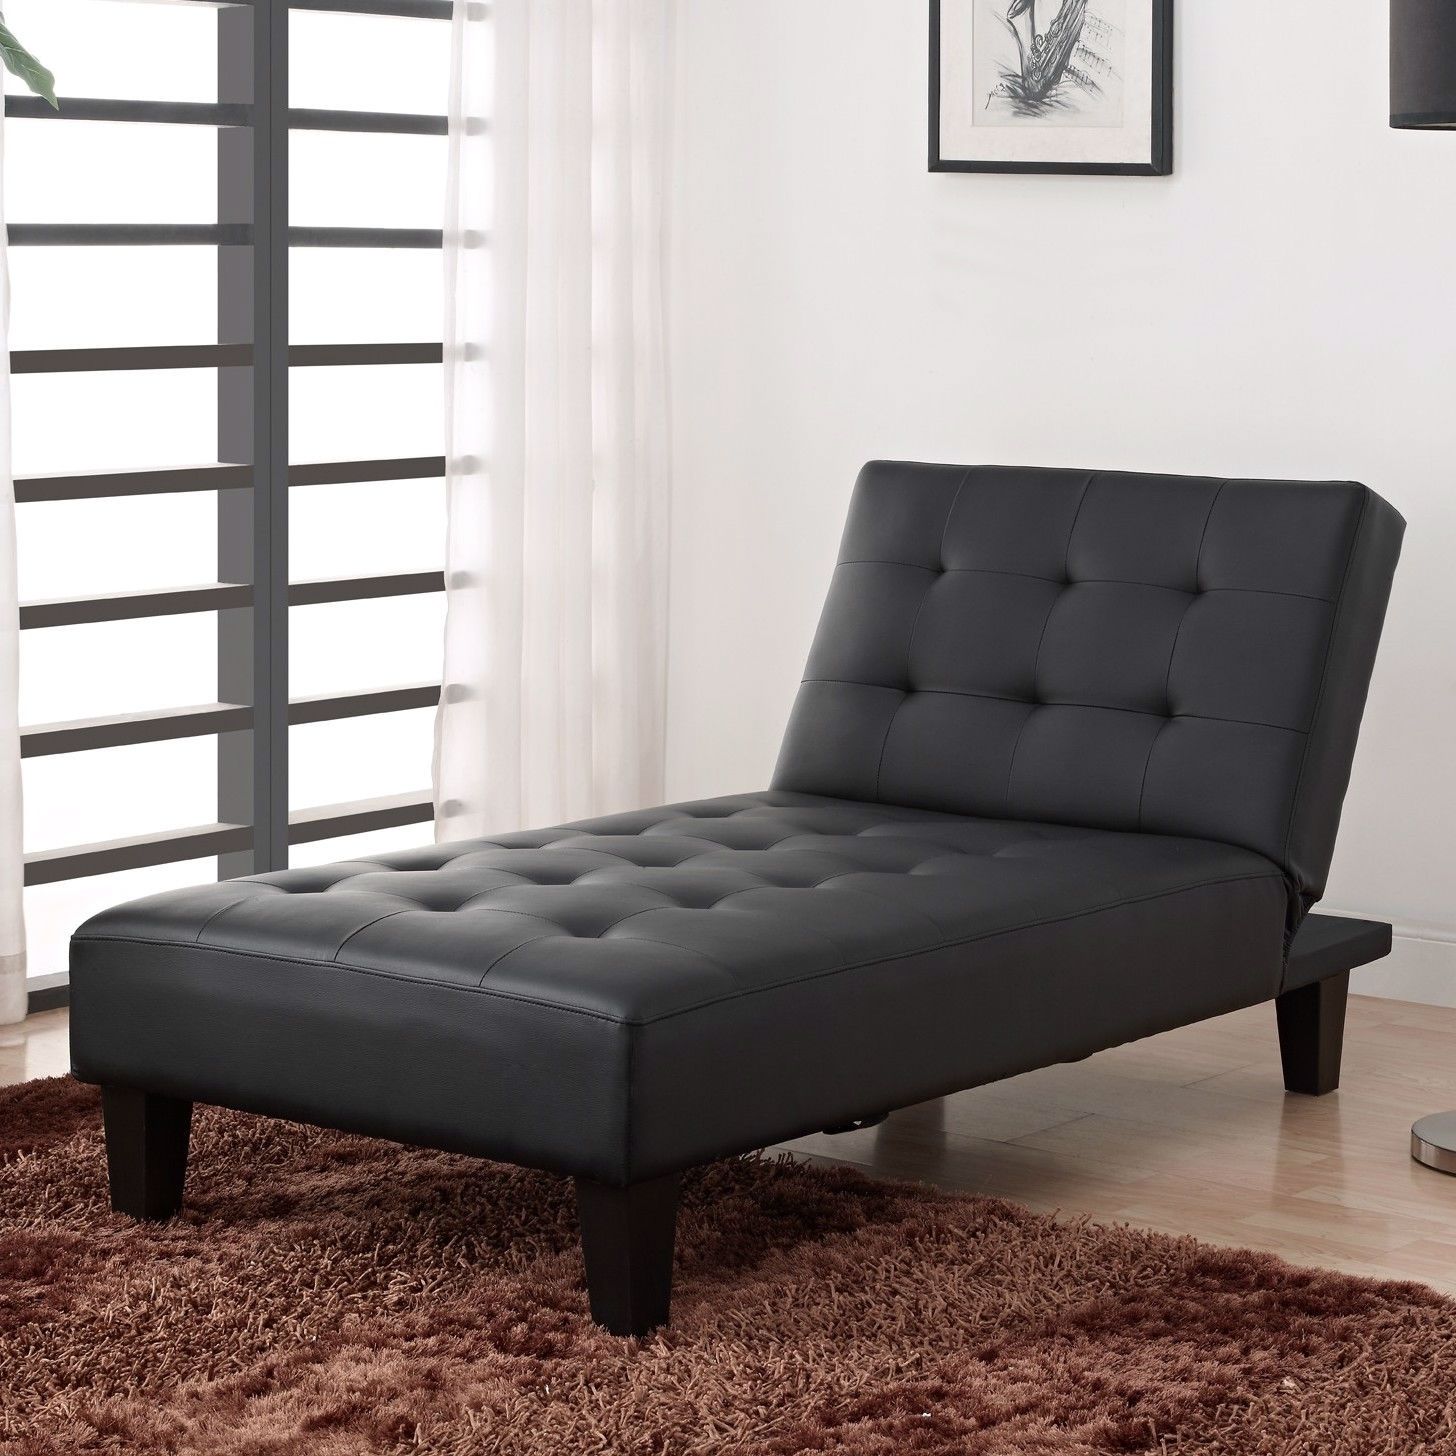 Favorite Perfect Black Chaise Lounge Style — Awesome Homes Regarding Black Leather Chaises (View 6 of 15)